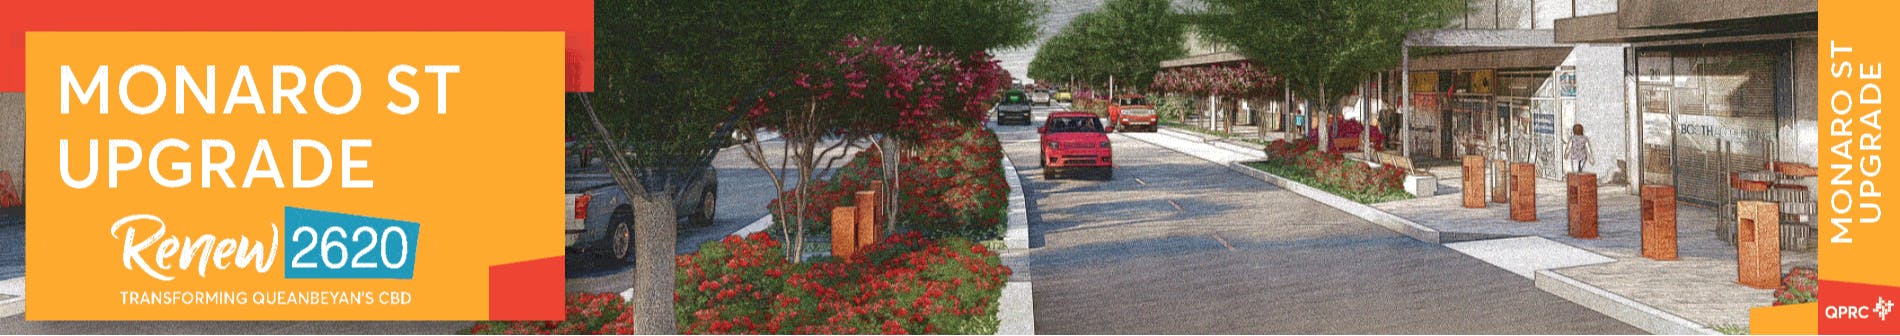 Artists impression of proposed Monaro Street upgrades showing wider footpaths, lower kerb height and traffic movements